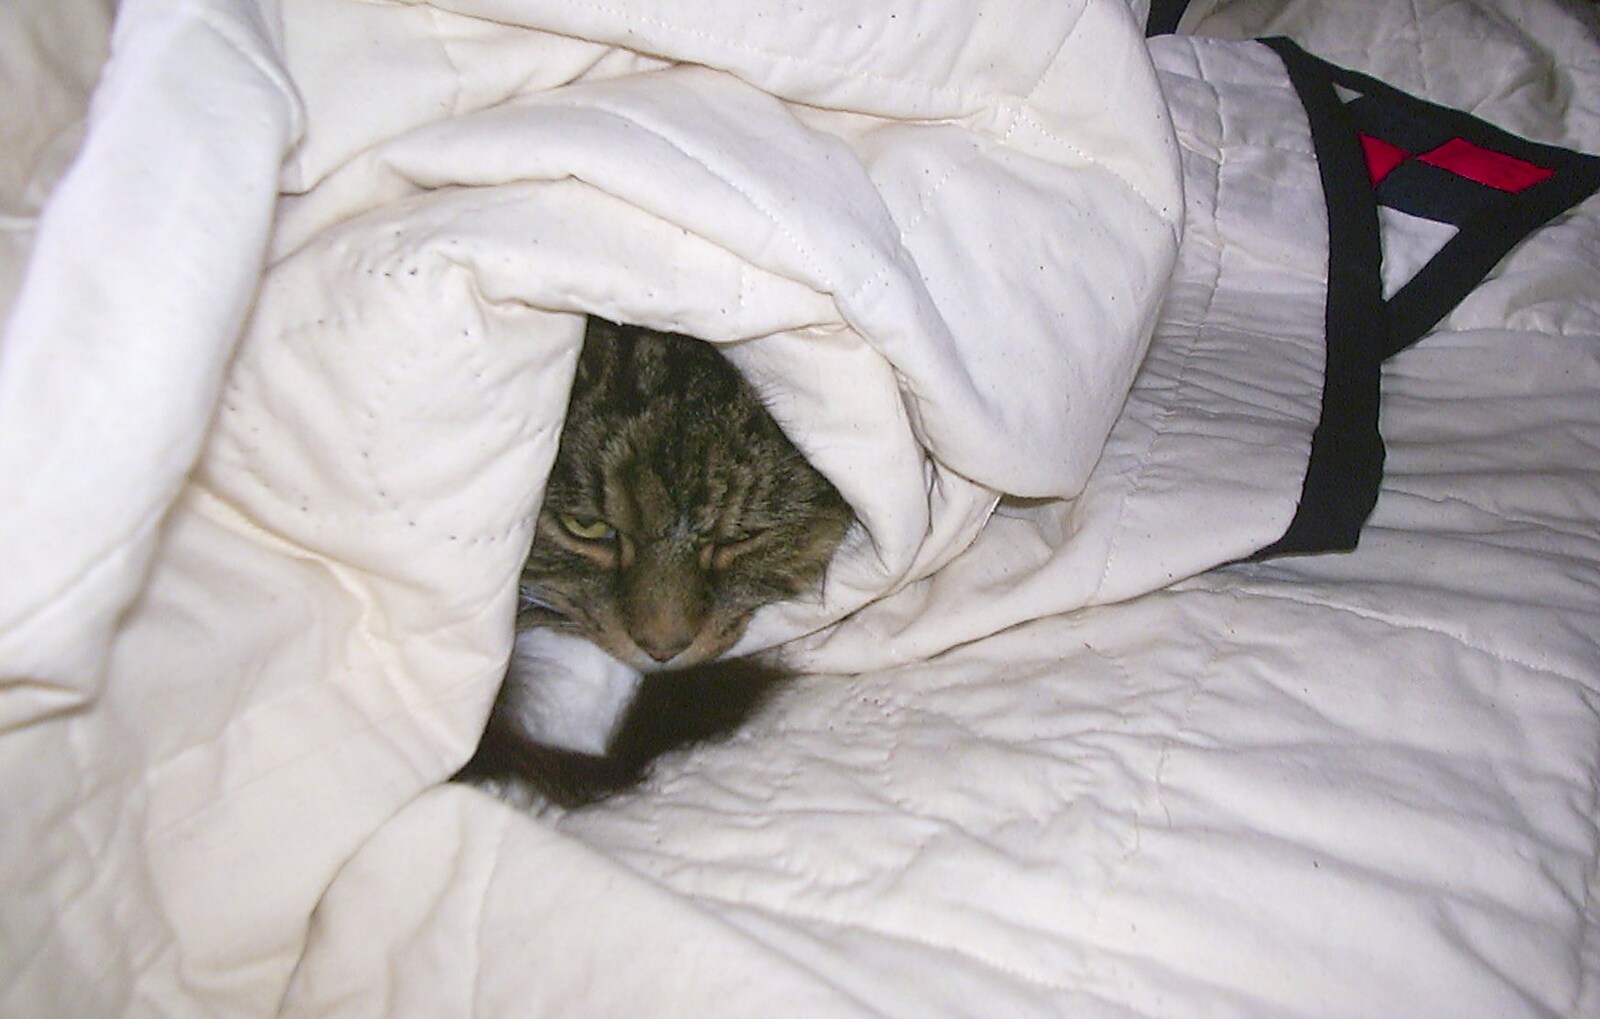 Sophie's under a duvet from Christmas Day at Nosher's, Brome, Suffolk - 25th December 2002